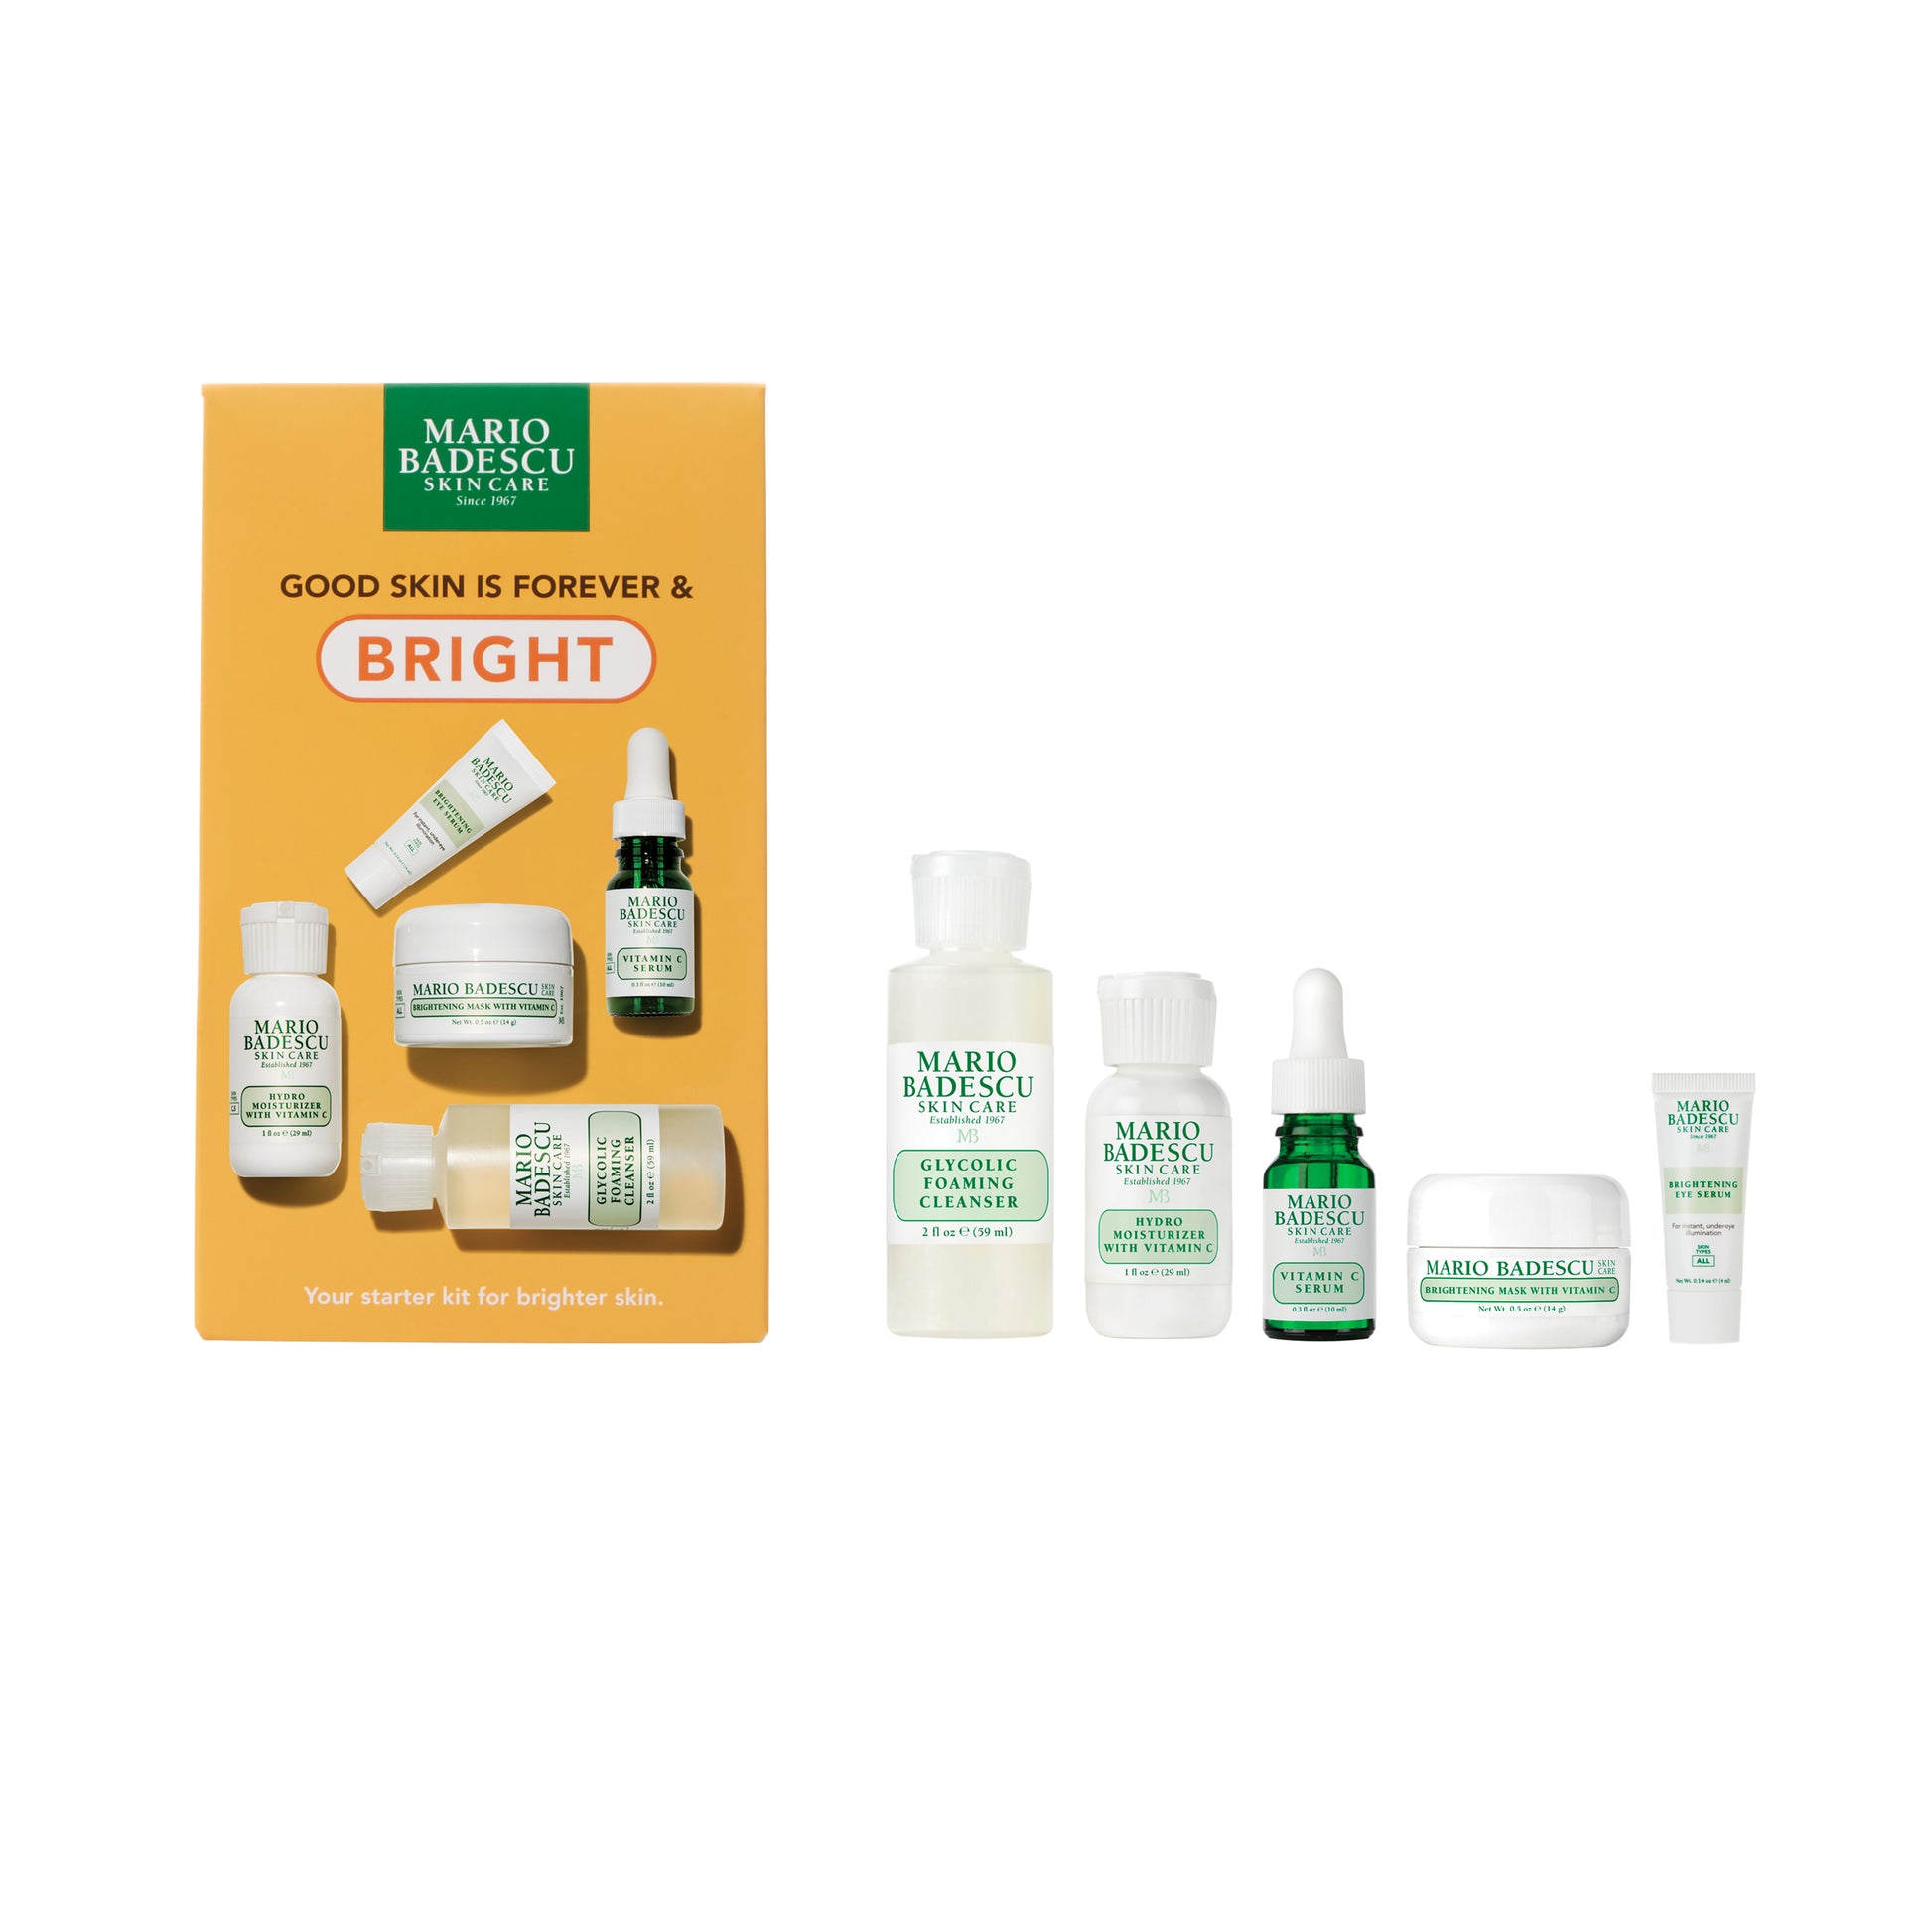  Mario Badescu Good Skin Is Forever & Bright